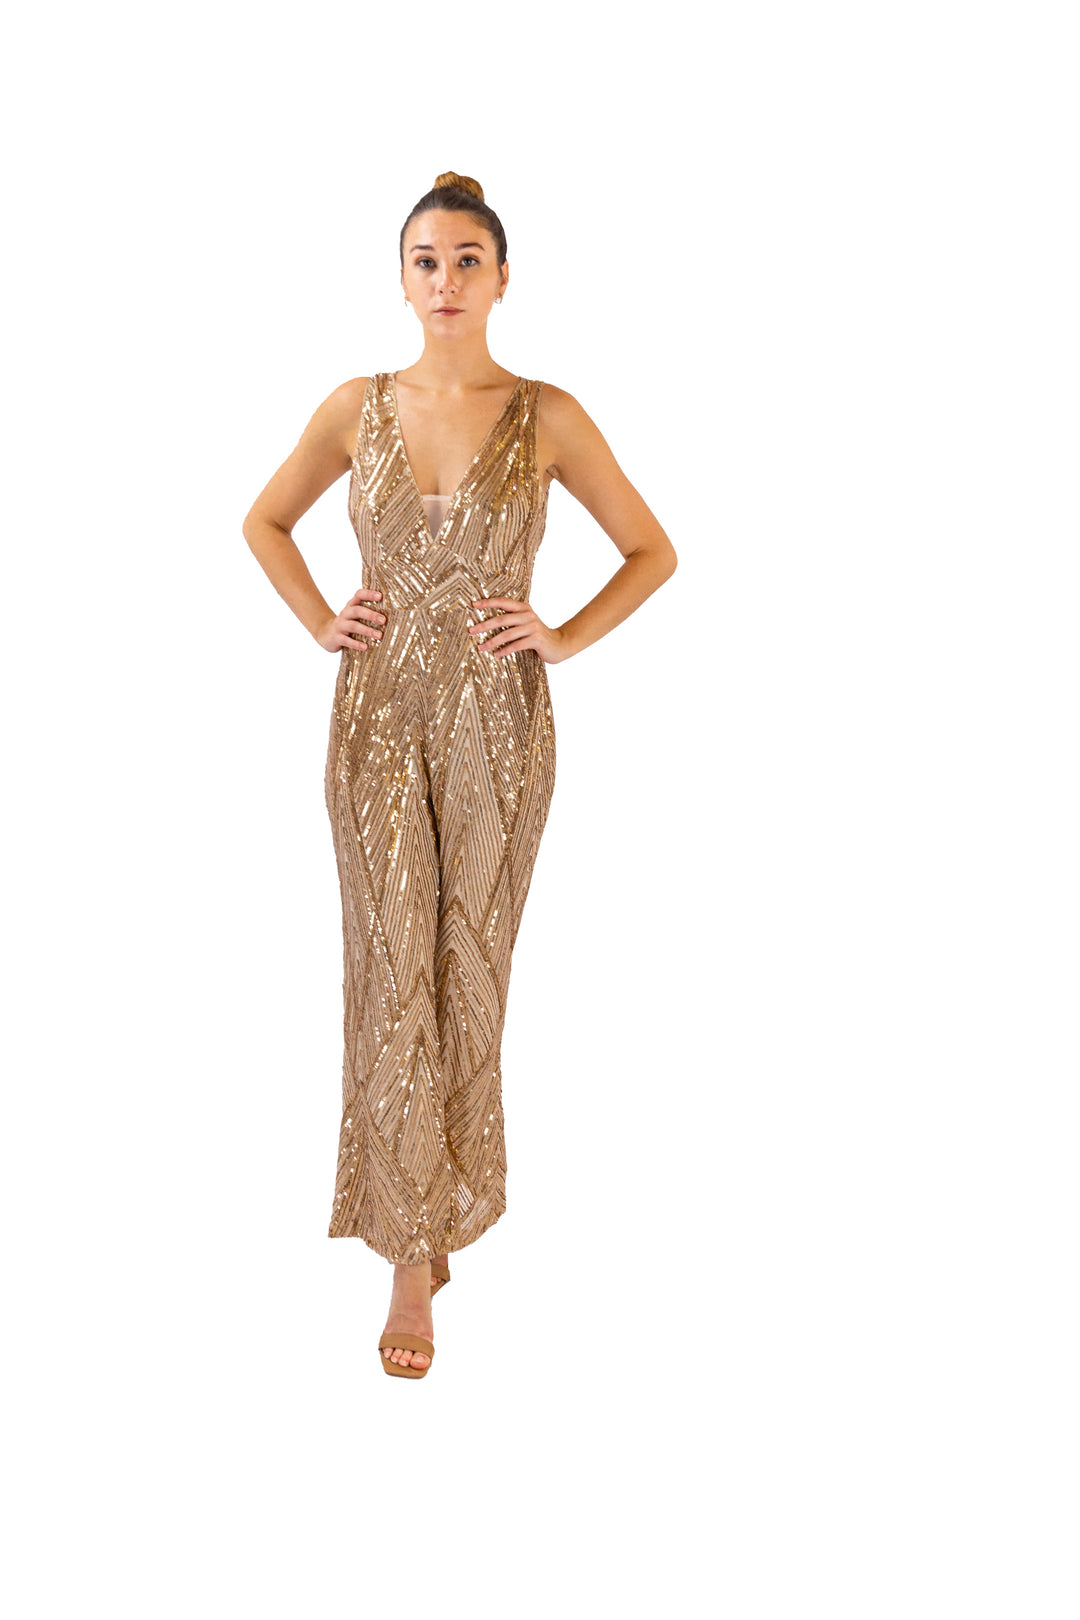 Fabonics Gala Radiance Golden Sequined Evening Jumpsuit with Wide-Leg Pants and Adjustable Straps for an Elegant Party Look